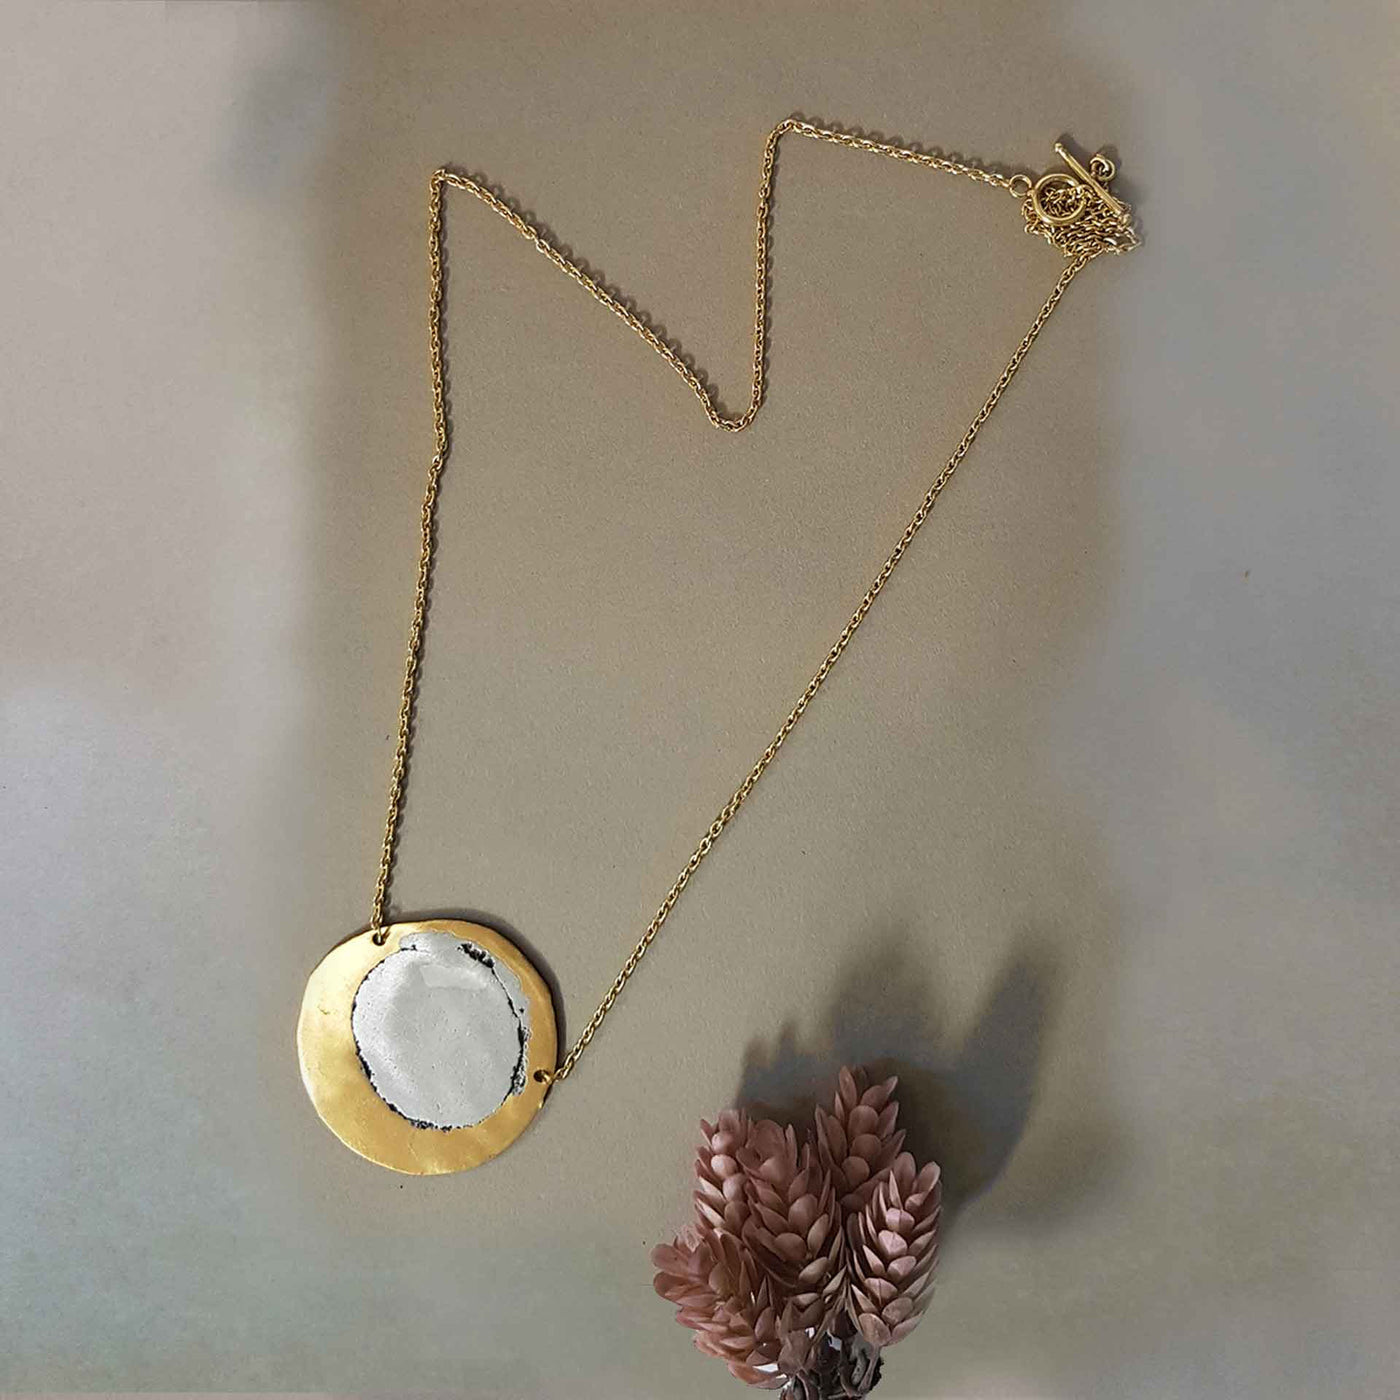 brass silver coloured necklace, with one circular charm